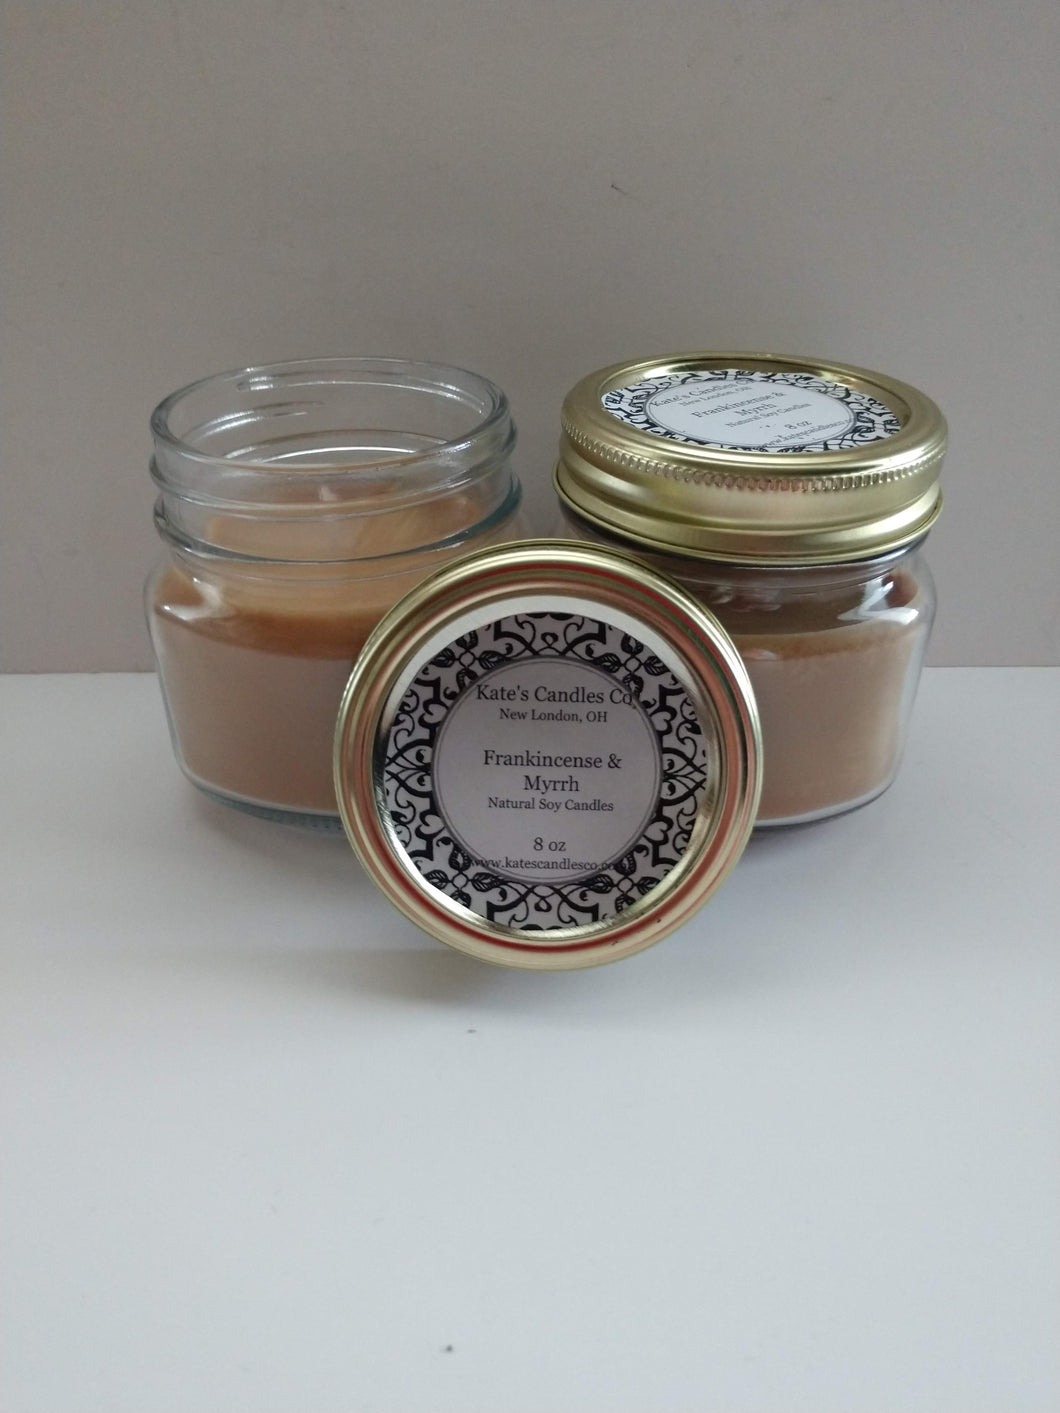 Frankincense & Myrrh Scented Soy Candles - Kate's Candles Co. Soy Candles